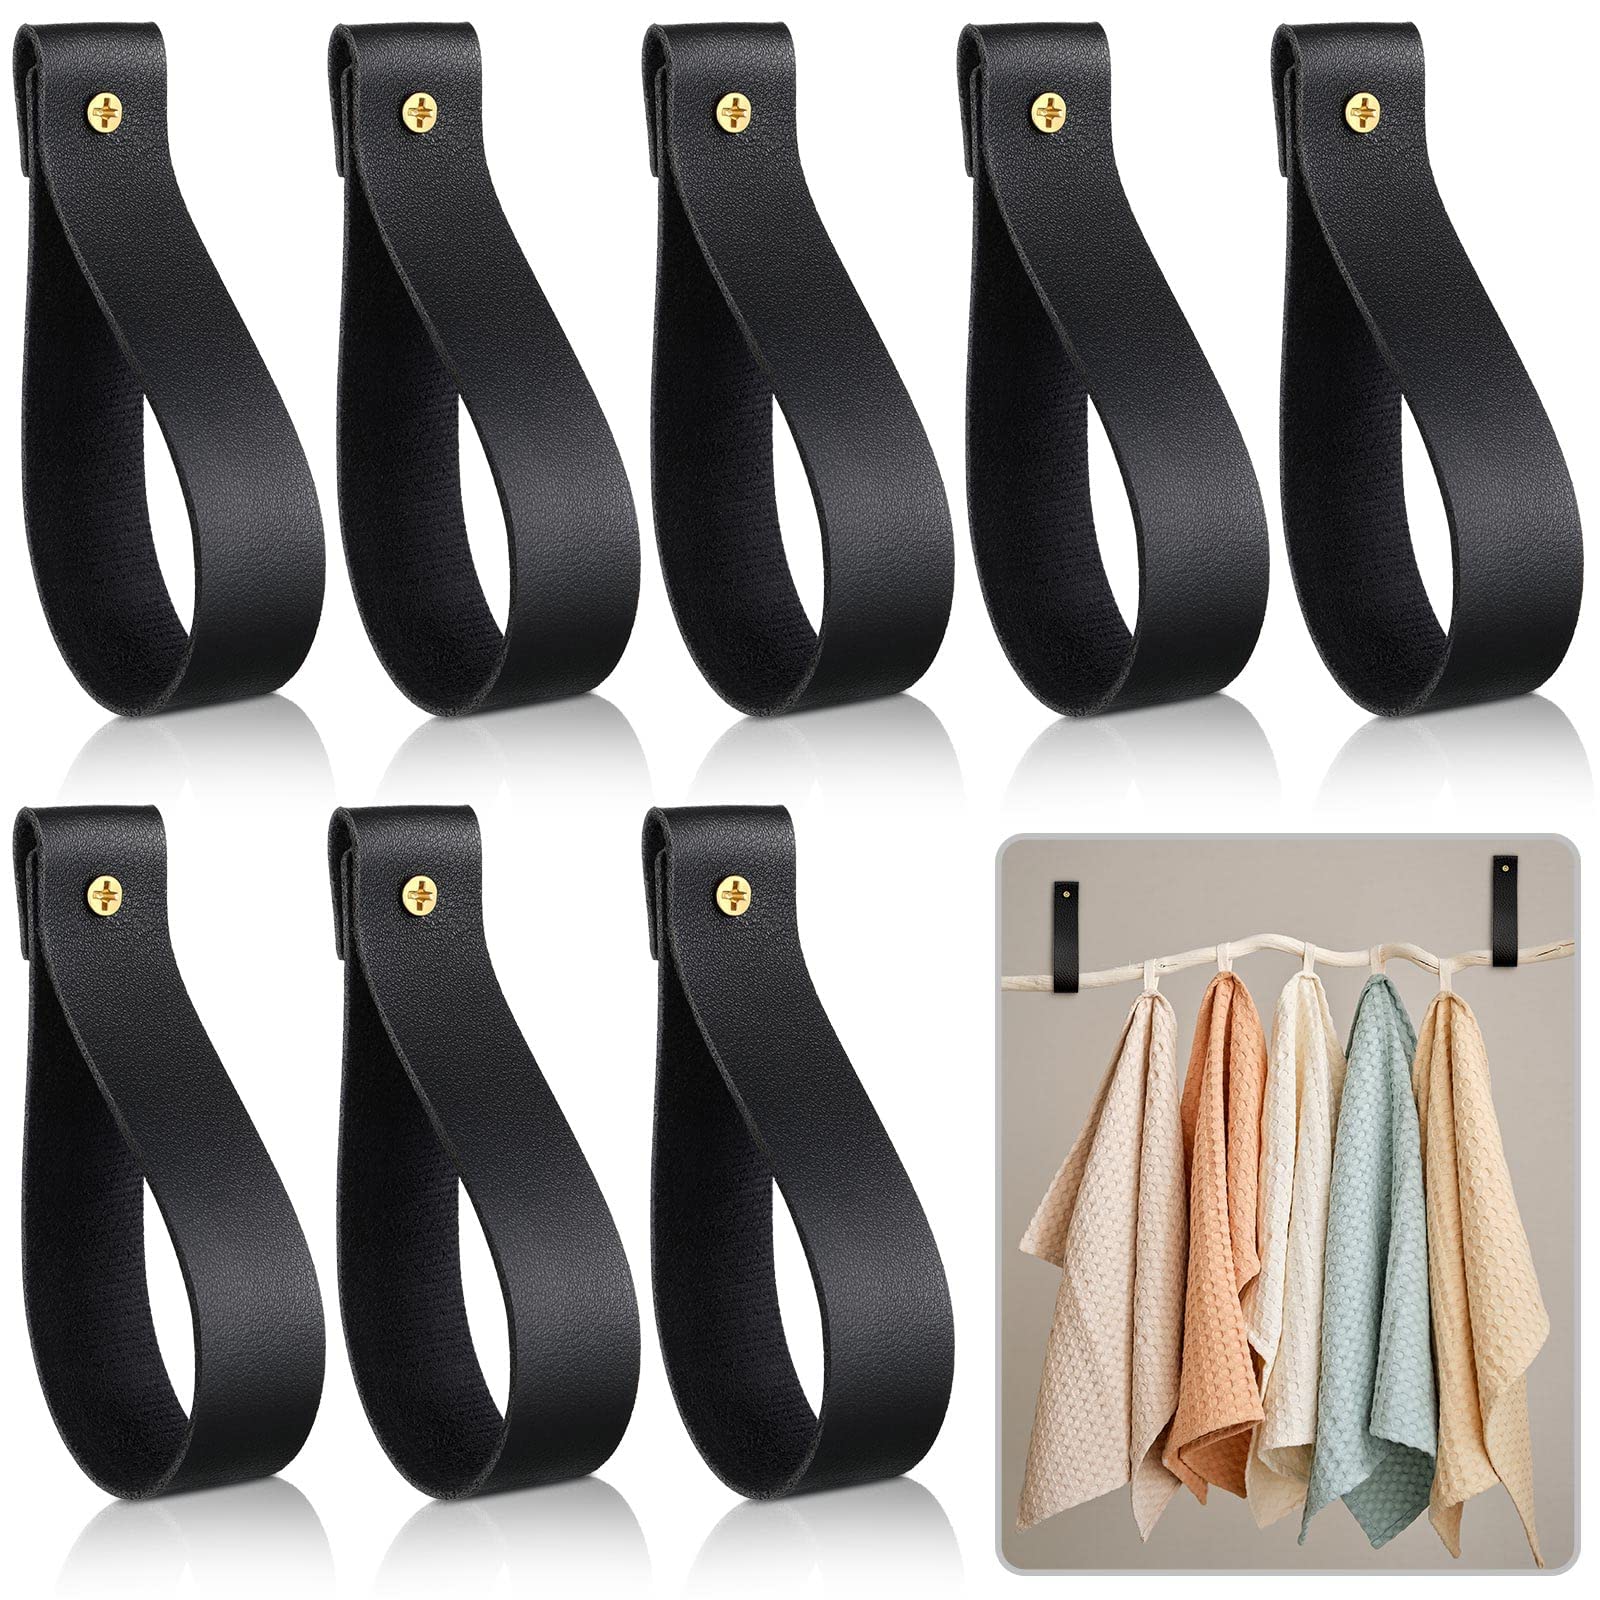 8 Pcs Artificial Leather Wall Hooks 1 x 4.7 Inches Wall Hanging Strap Wall Mounted Loop for Hanging Leather Strap Hangers for Bathroom Kitchen Bedroom